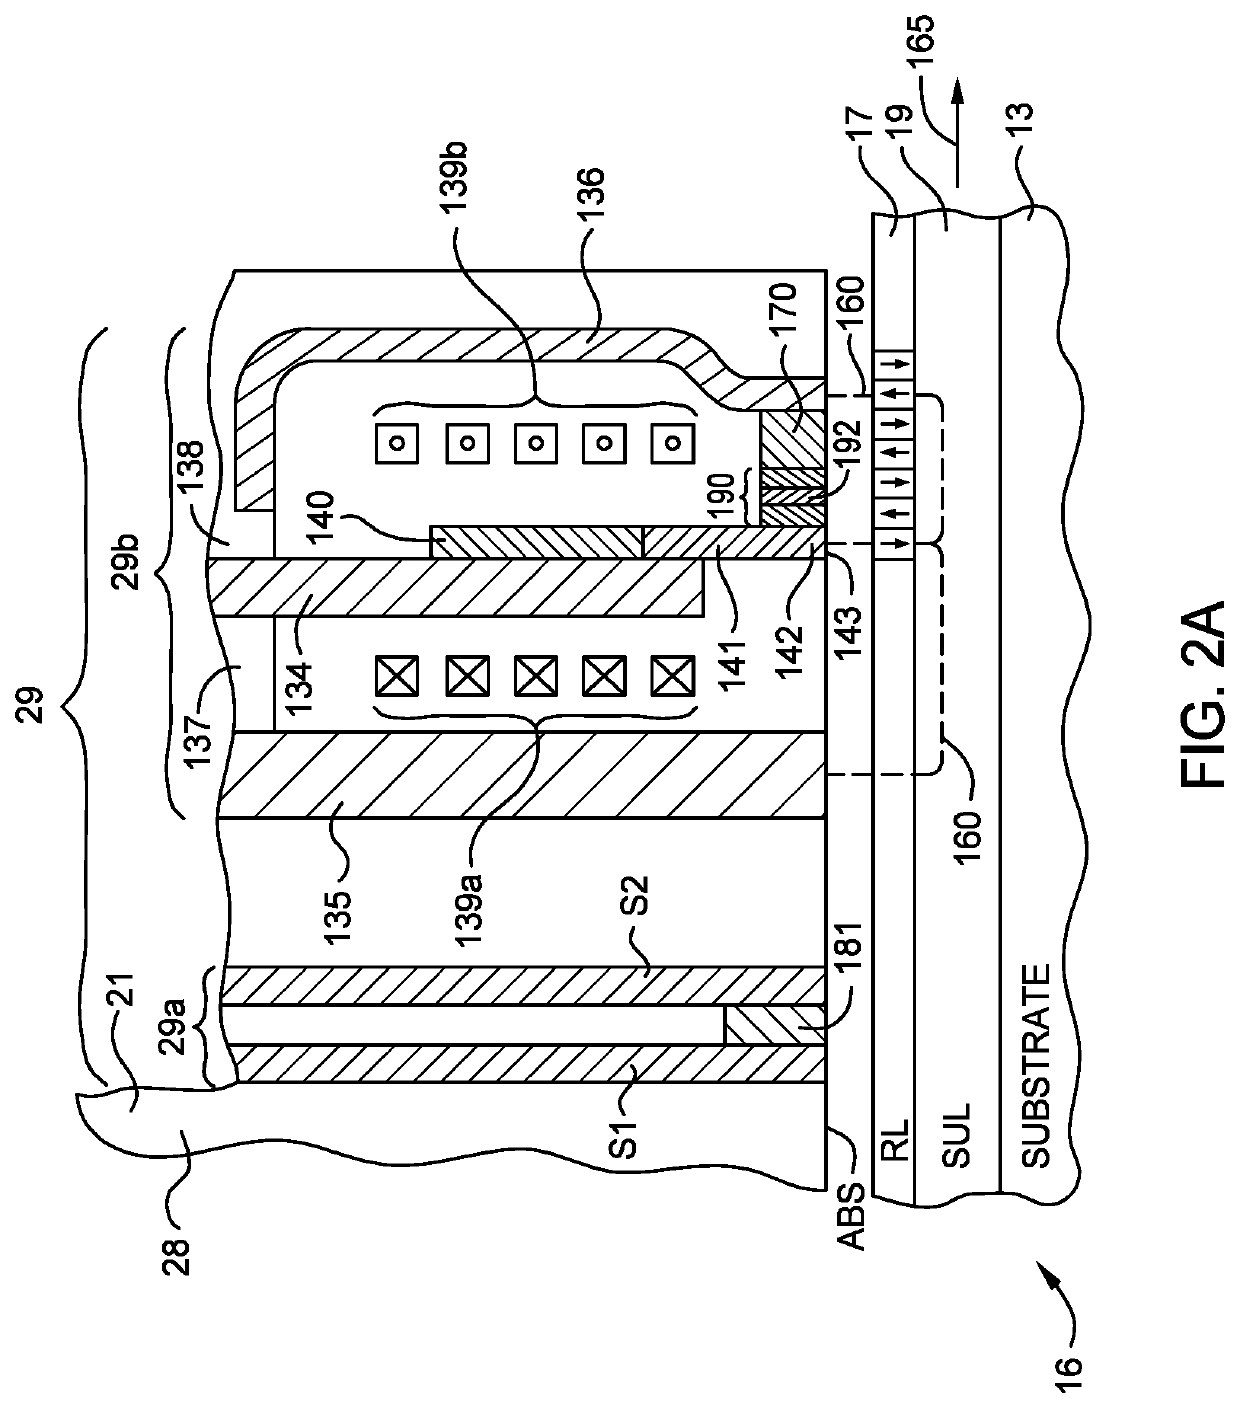 Spin transfer torque (STT) device with template layer for Heusler alloy magnetic layers